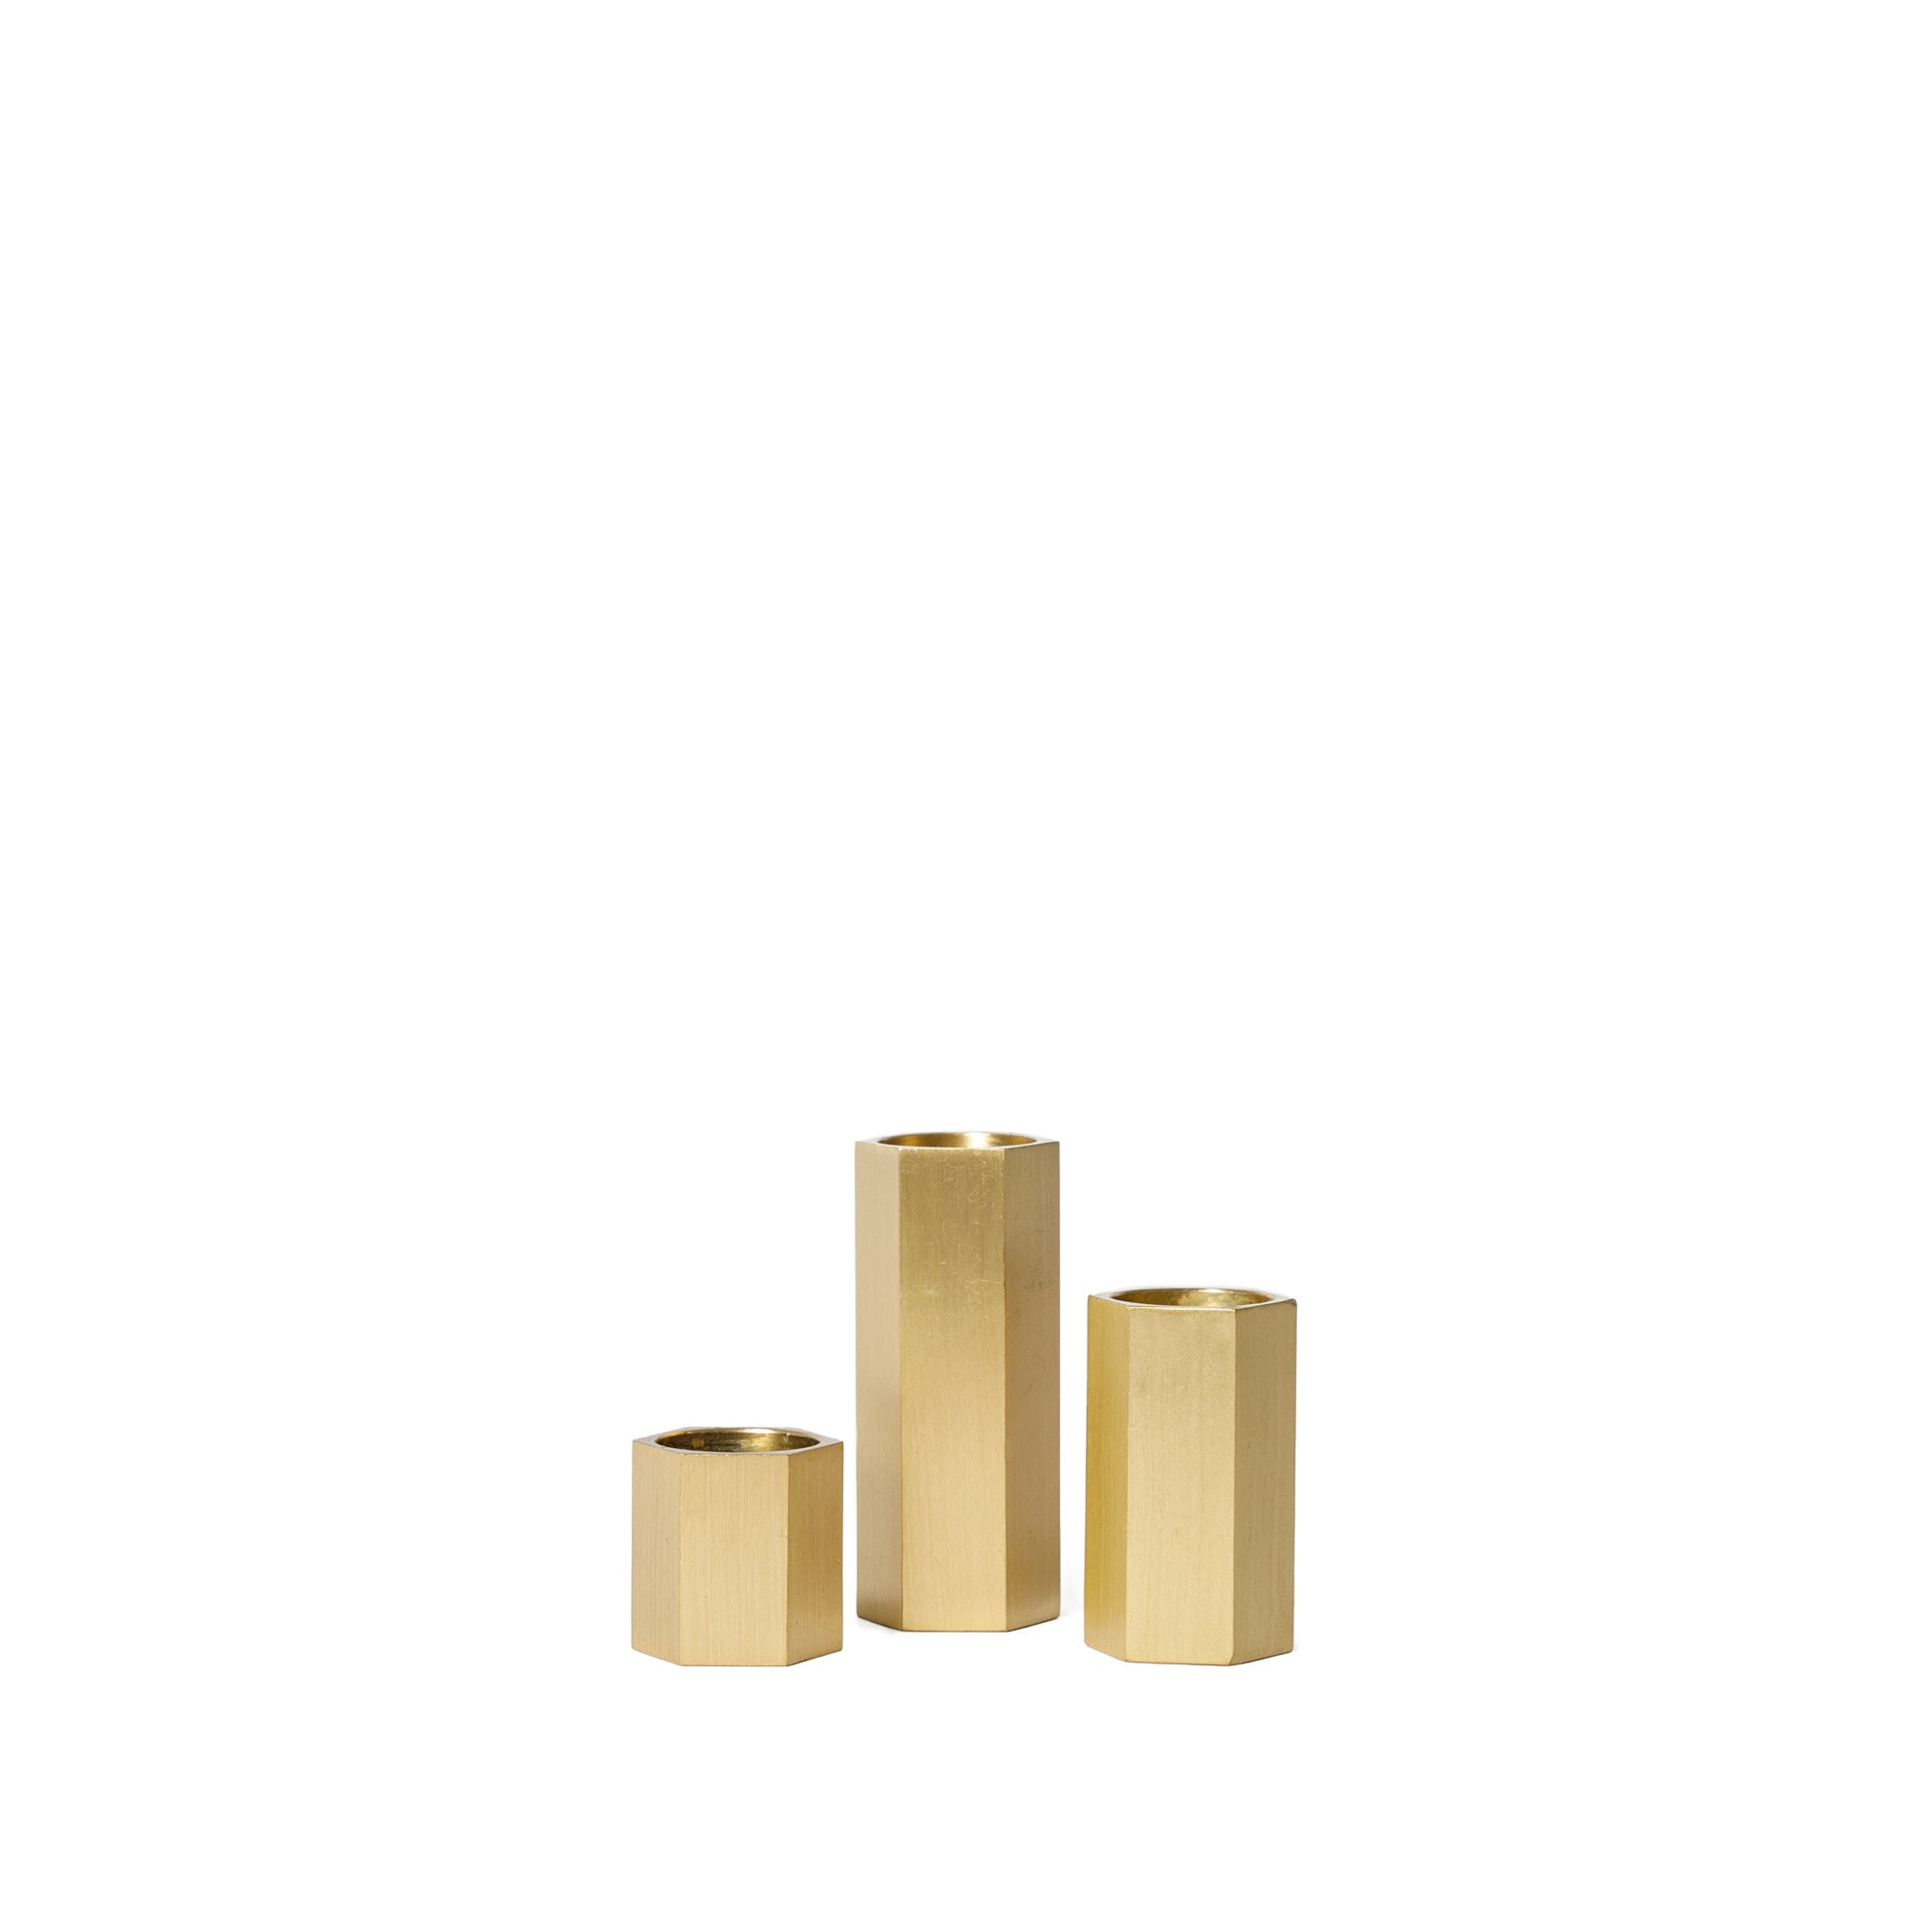 Brass candle holders for hire | For Love & Living Gold Coast Wedding & Event Styling